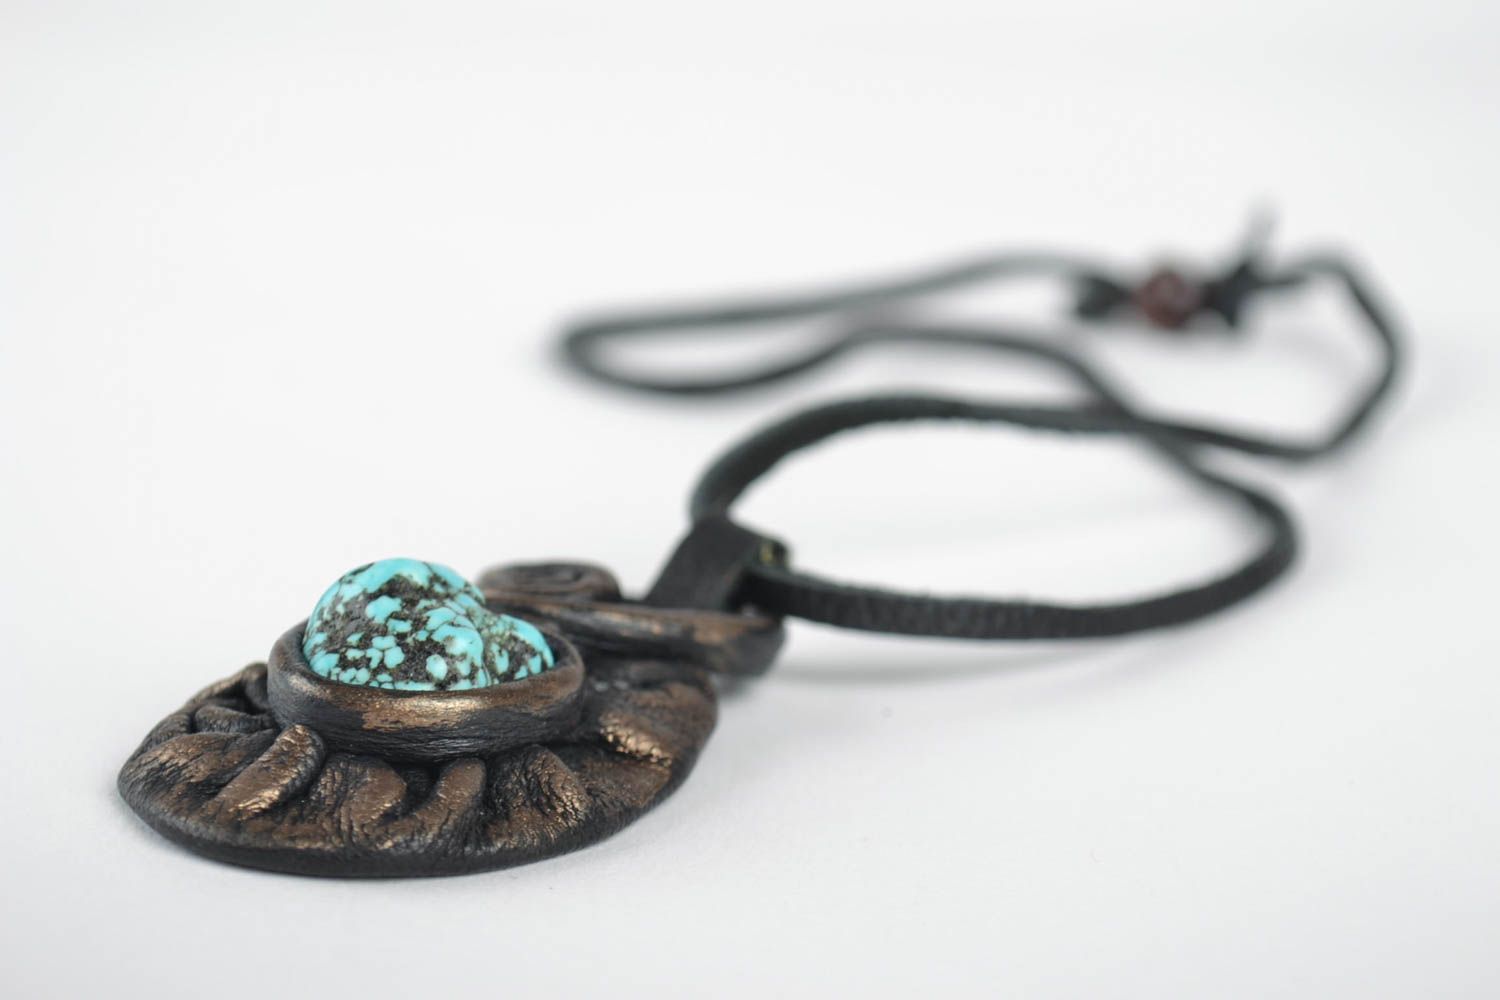 Necklace made of leather with turquoise pendant handmade leather jewelry photo 4